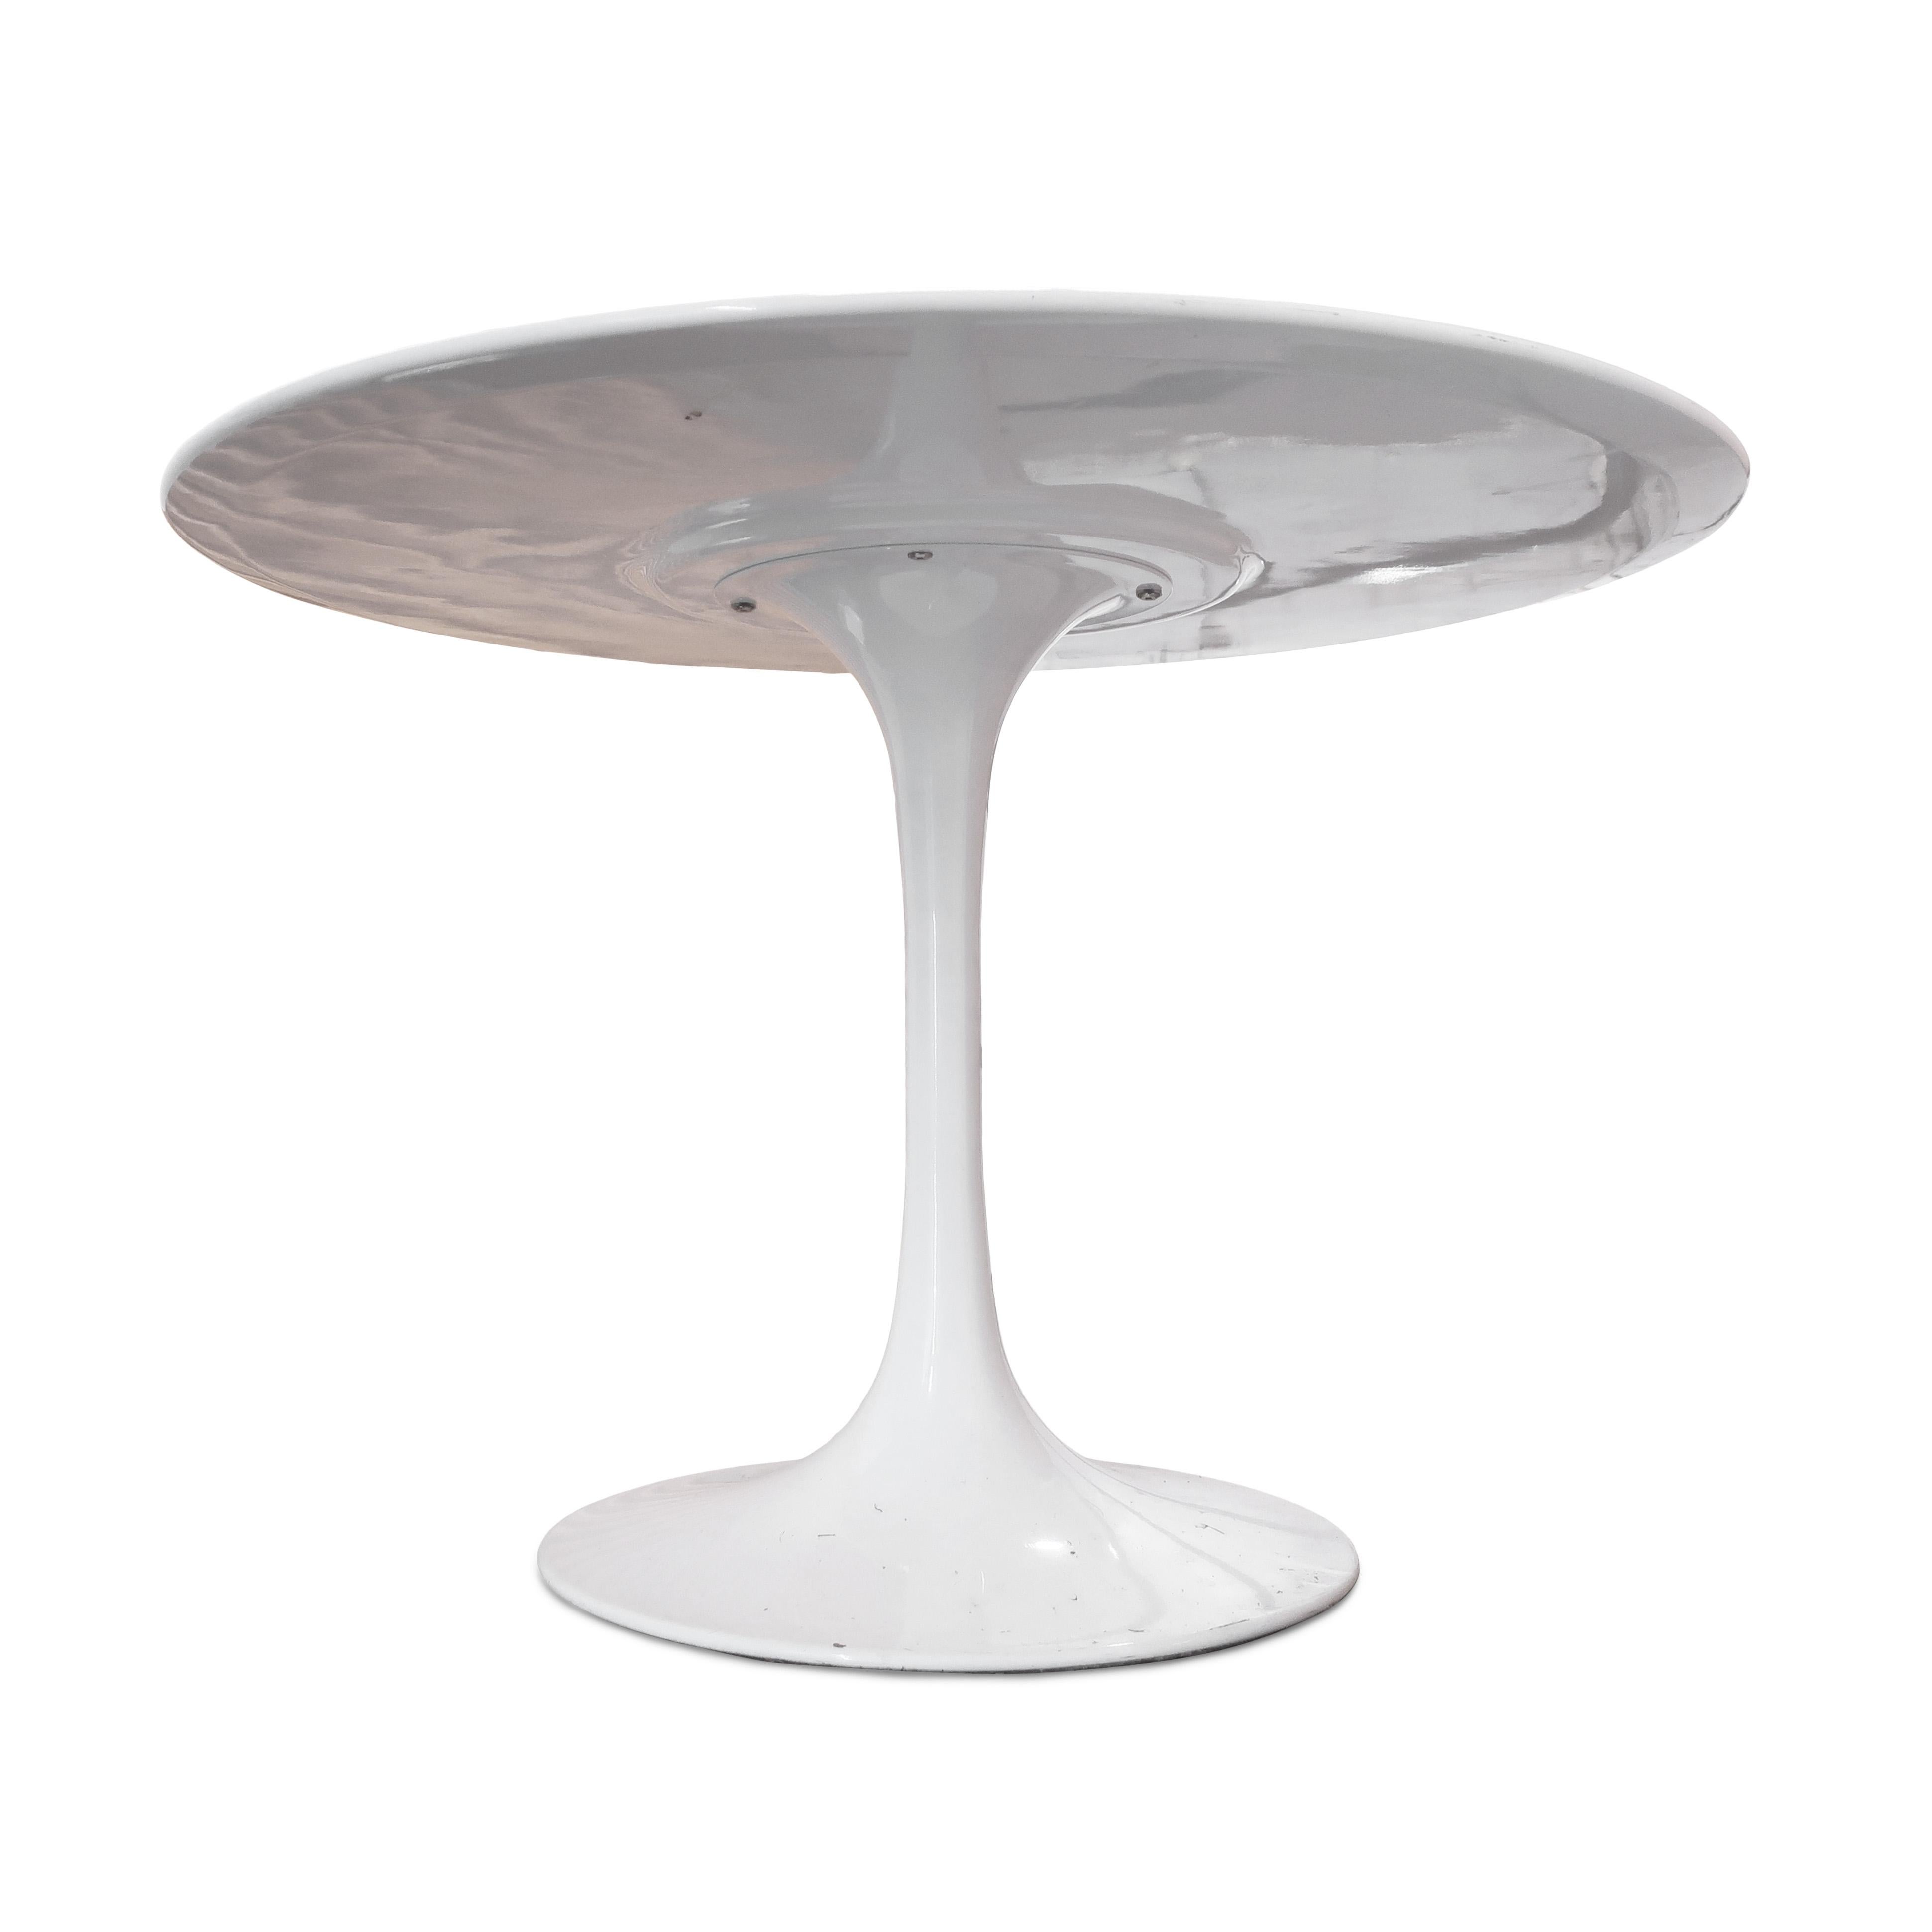 An instantly recognizable and iconic dining table featuring white powder coated tulip base and white lacquer top designed by mid-century modern superstar Eero Saarinen for Knoll in the 1950s. The table top features a beveled edge sitting on a single